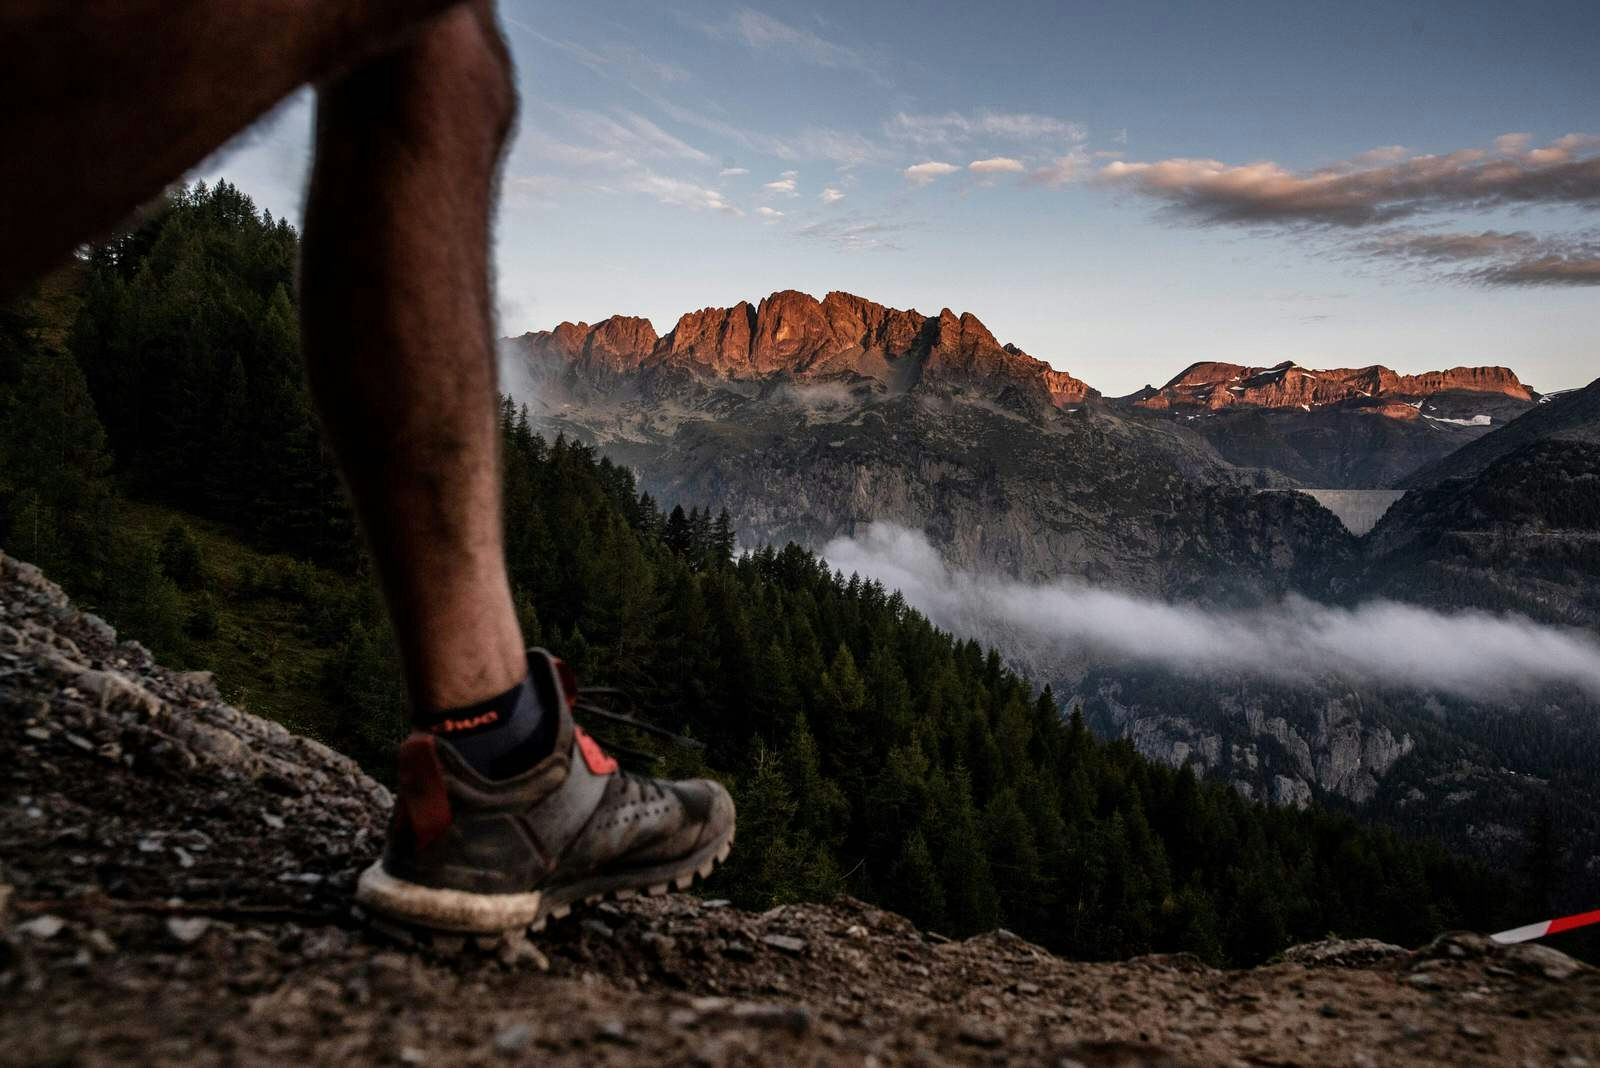 An incredible mountain ridge lit by the morning sun is the backdrop to the lower half of a runner's leg striding through the grass in the foreground